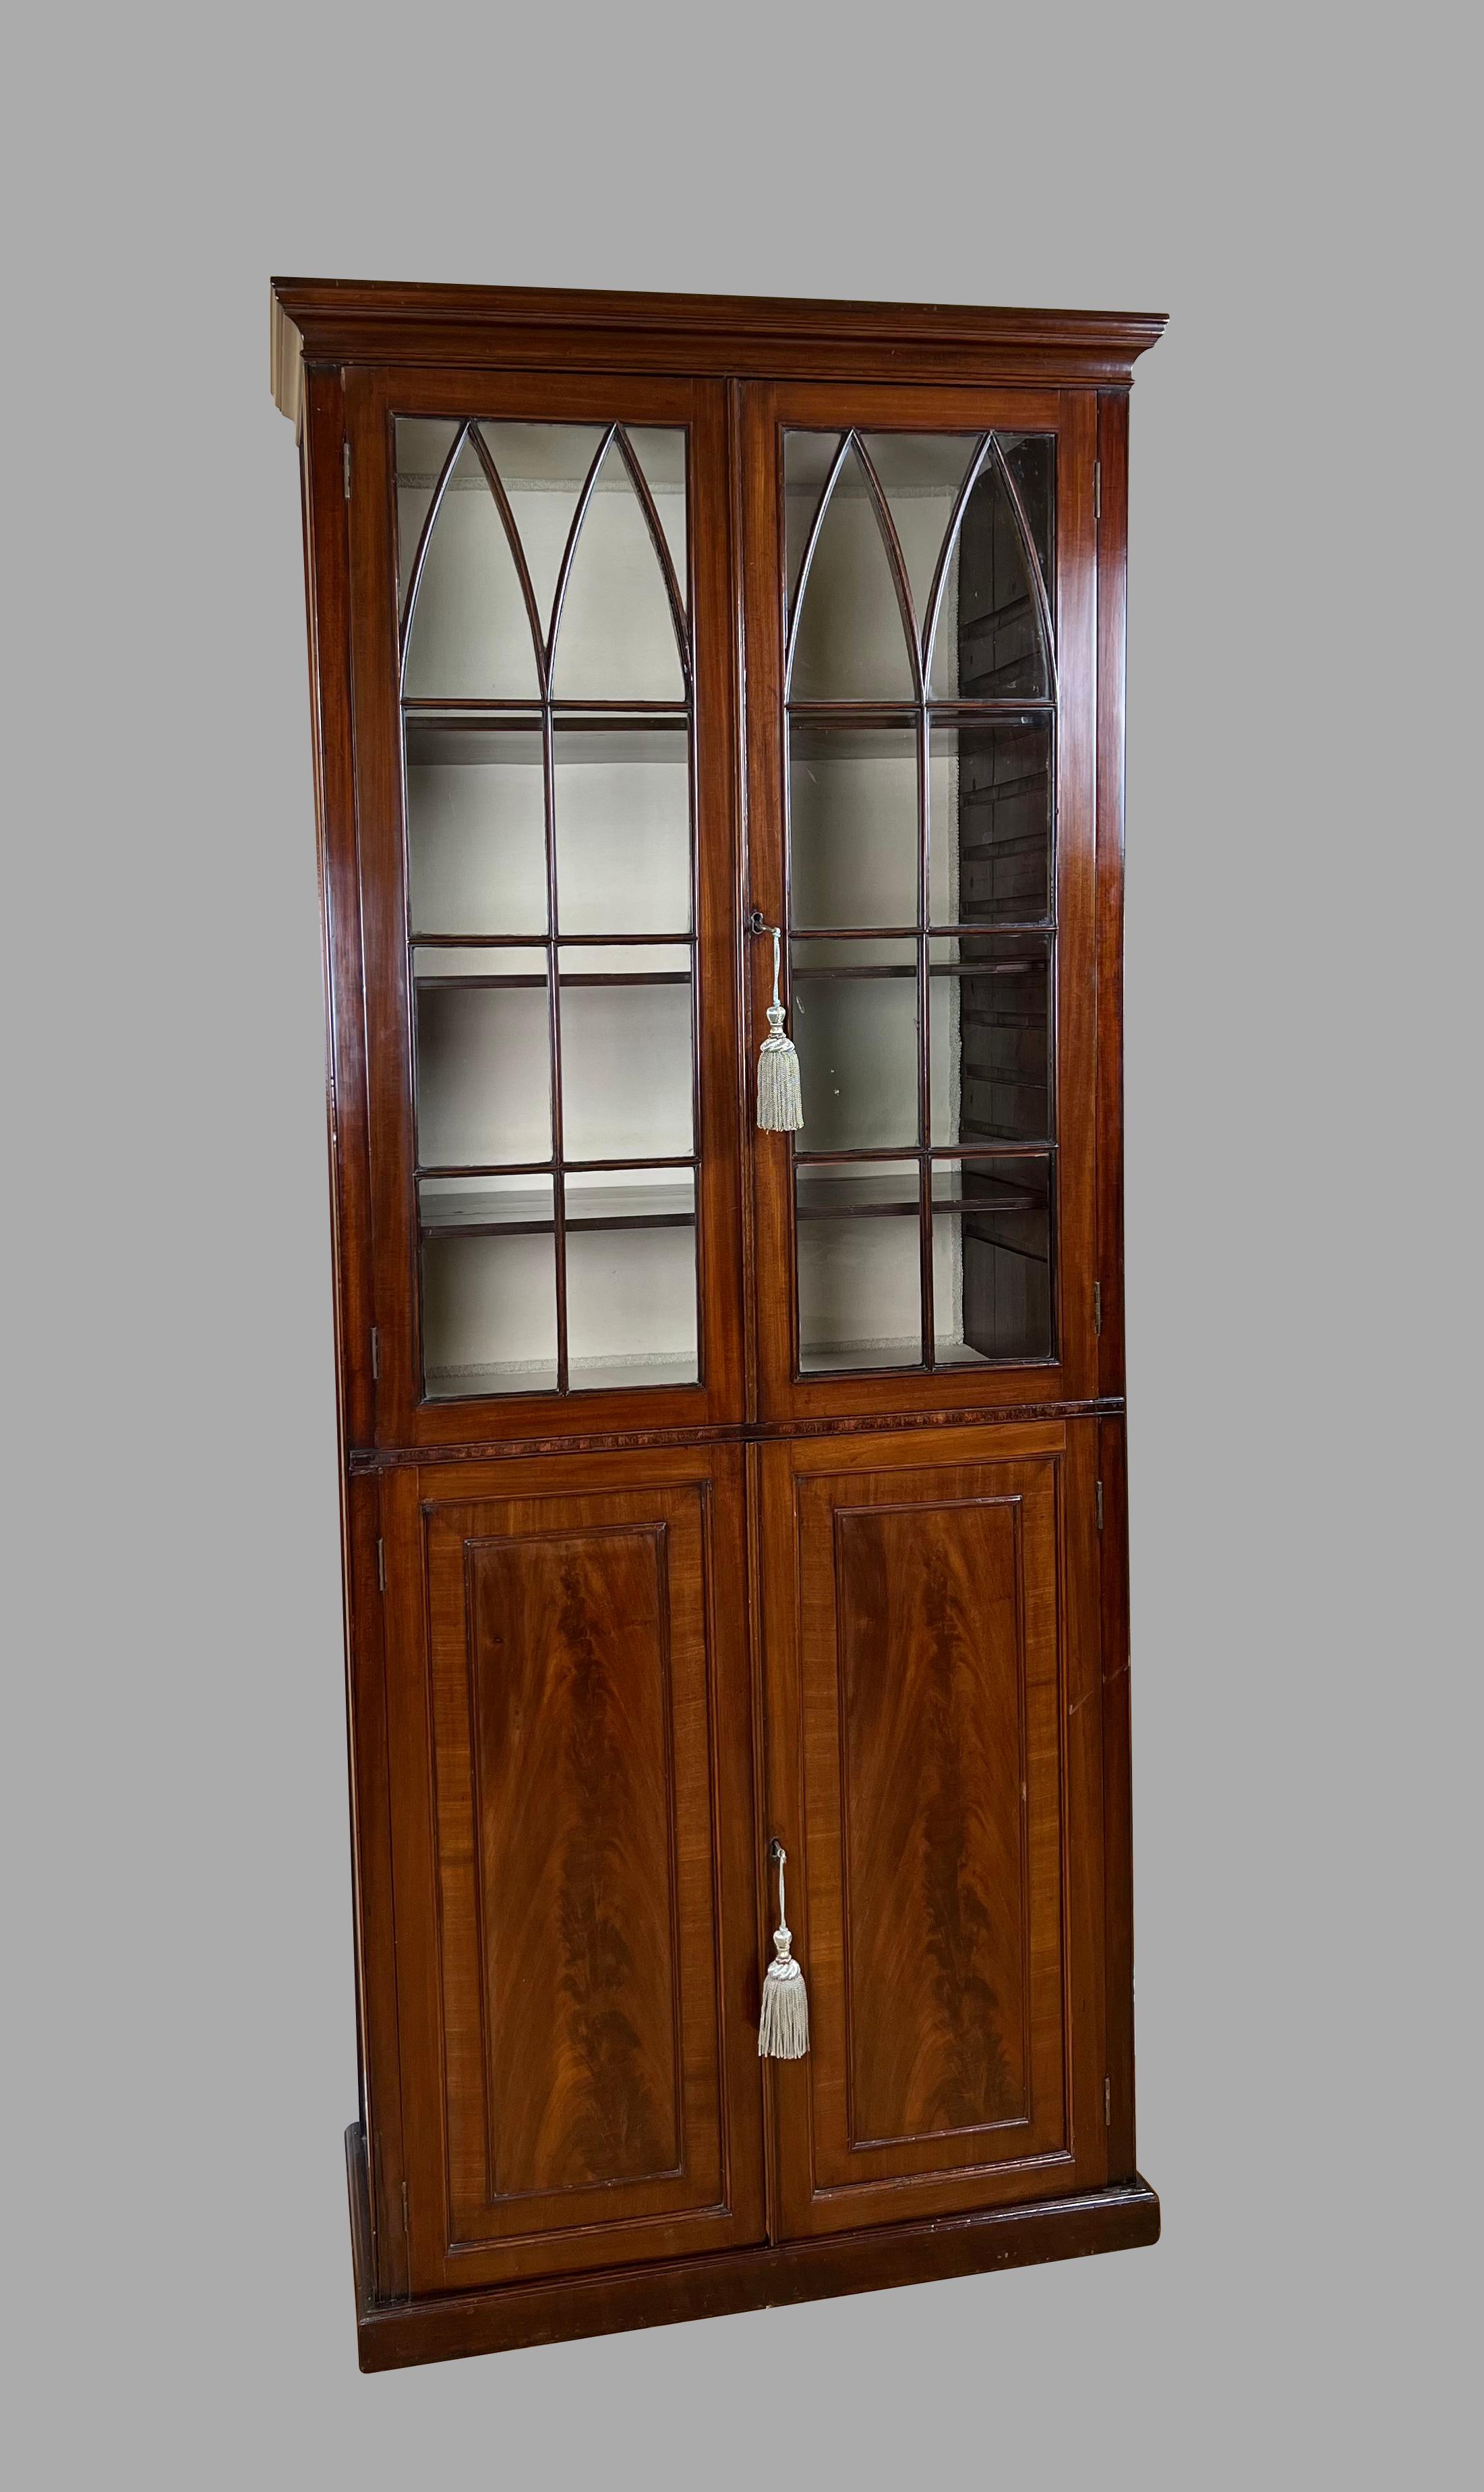 English Mahogany Late Georgian Period Bookcase with Glazed Doors For Sale 3